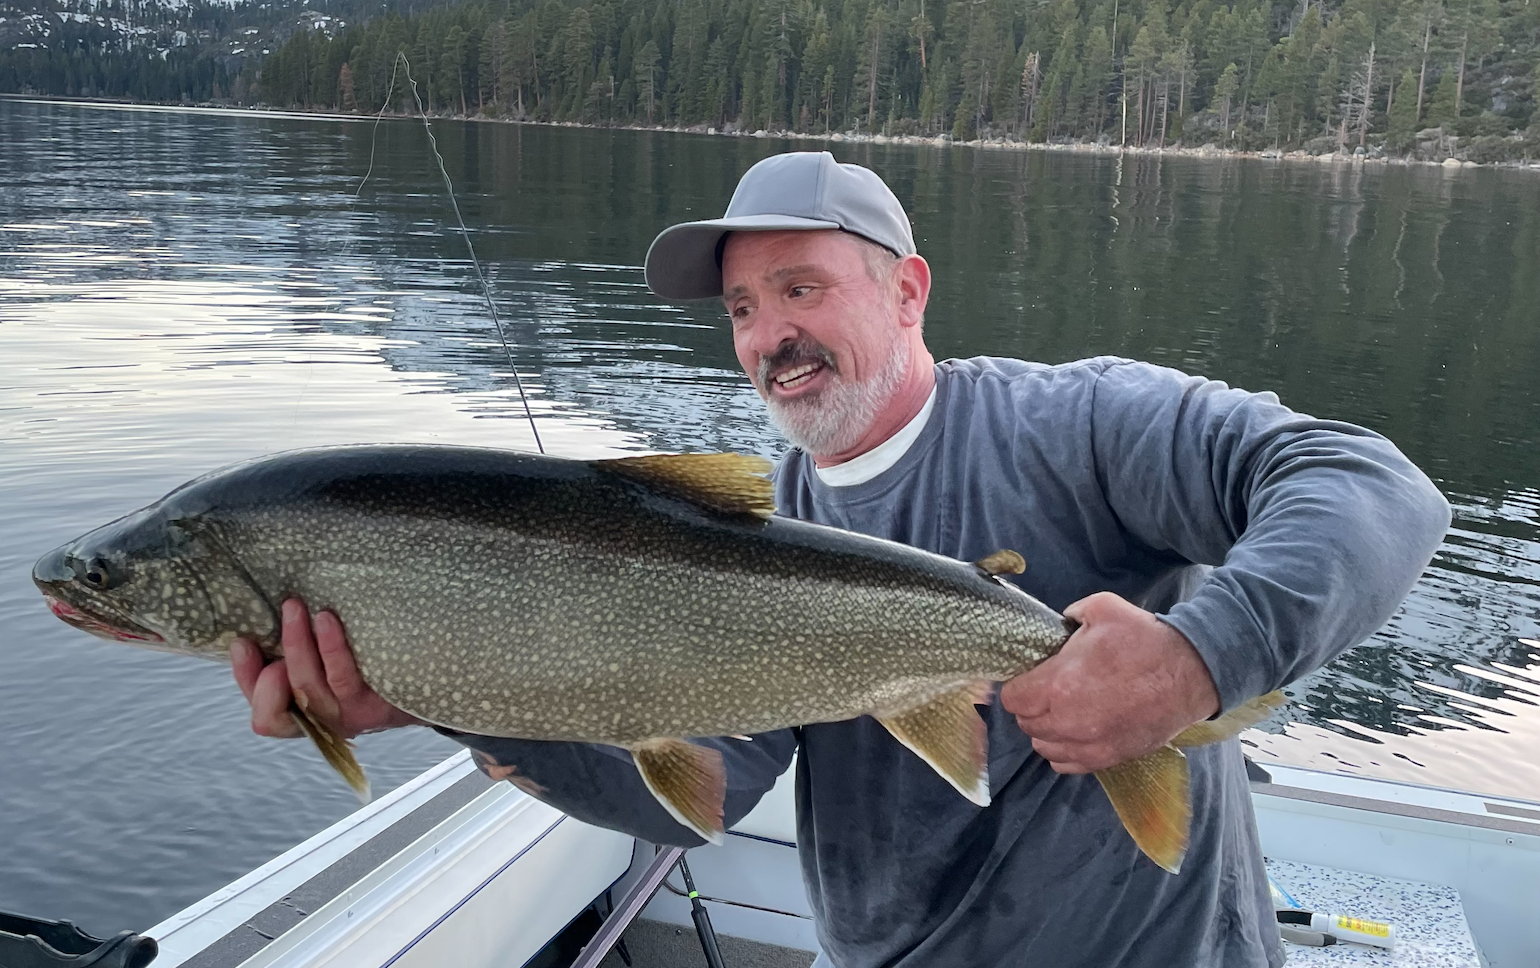 Big Fish Alert! Lakers up to 18 pounds